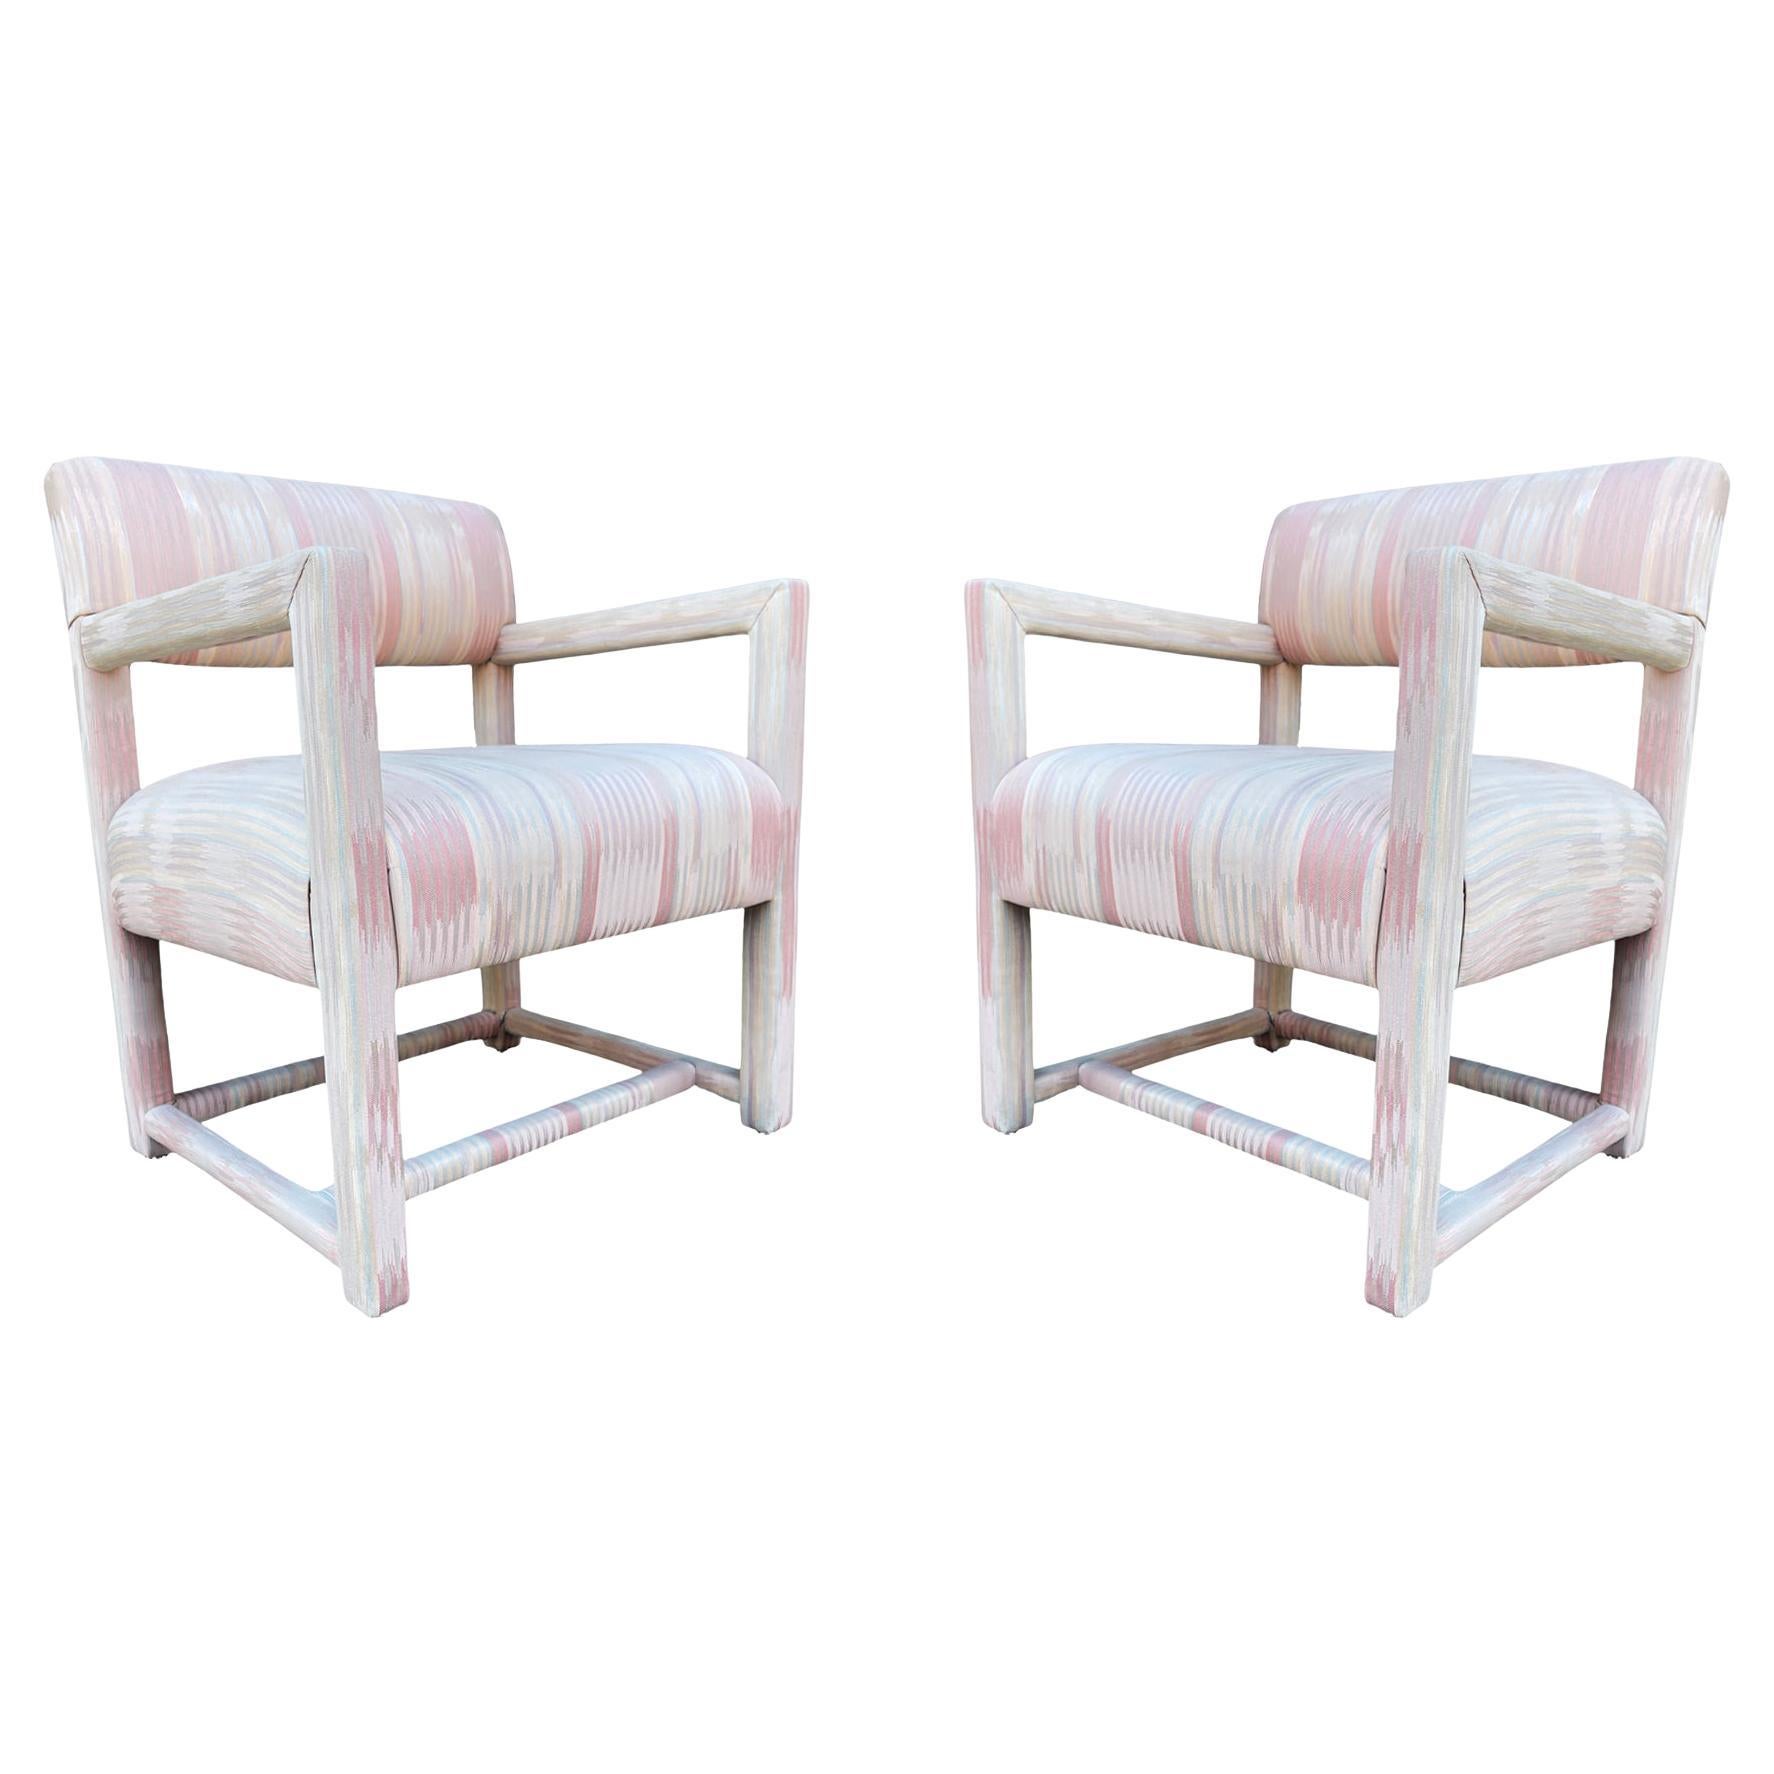 Pair of Mid-Century Modern Parsons Armchair Lounge Chairs after Milo Baughman